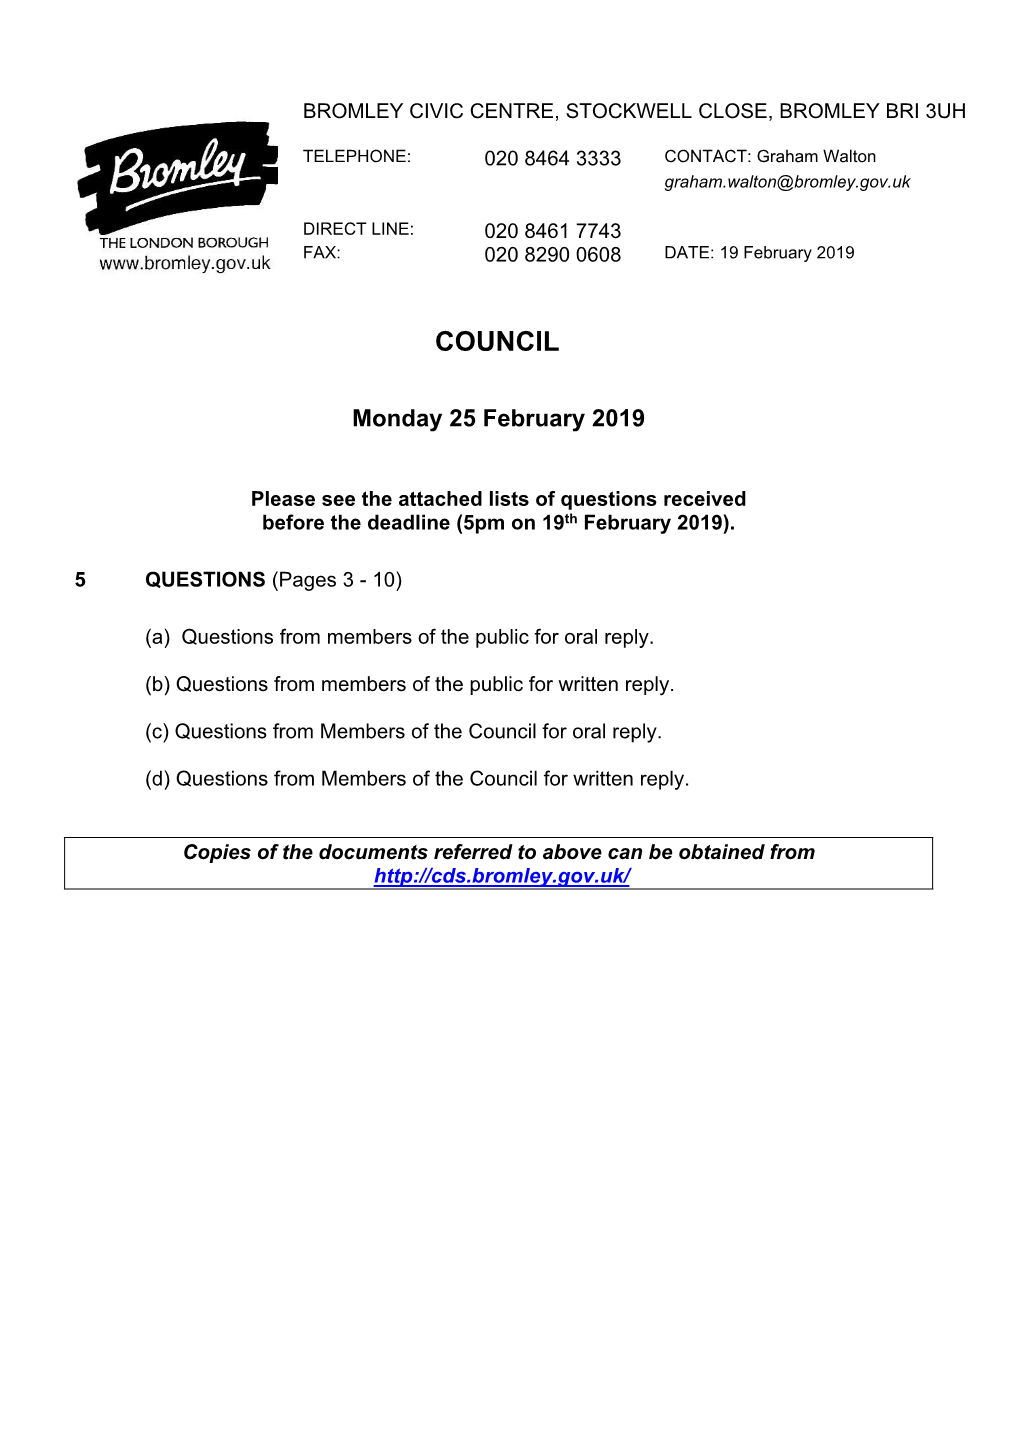 5. Questions Received Agenda Supplement for Council, 25/02